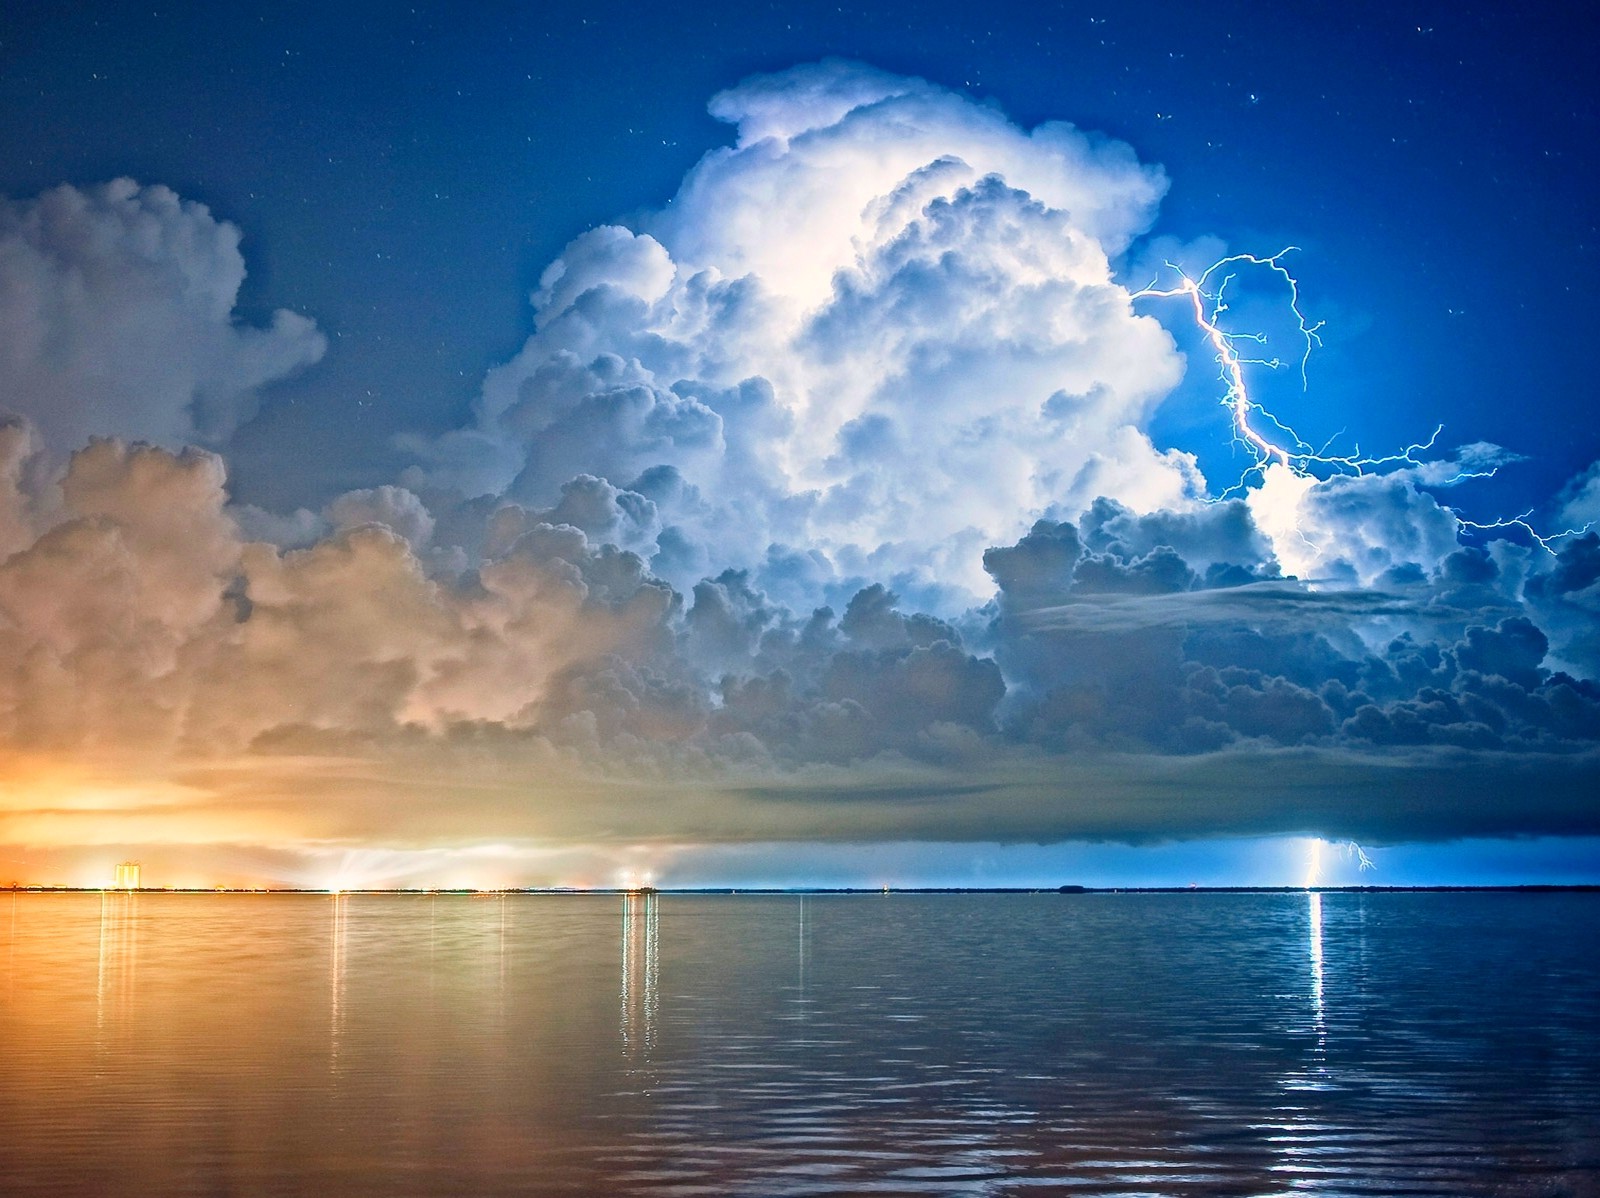 lightning, Clouds, Storm, Starry Night, Cape Canaveral, Florida, Sea